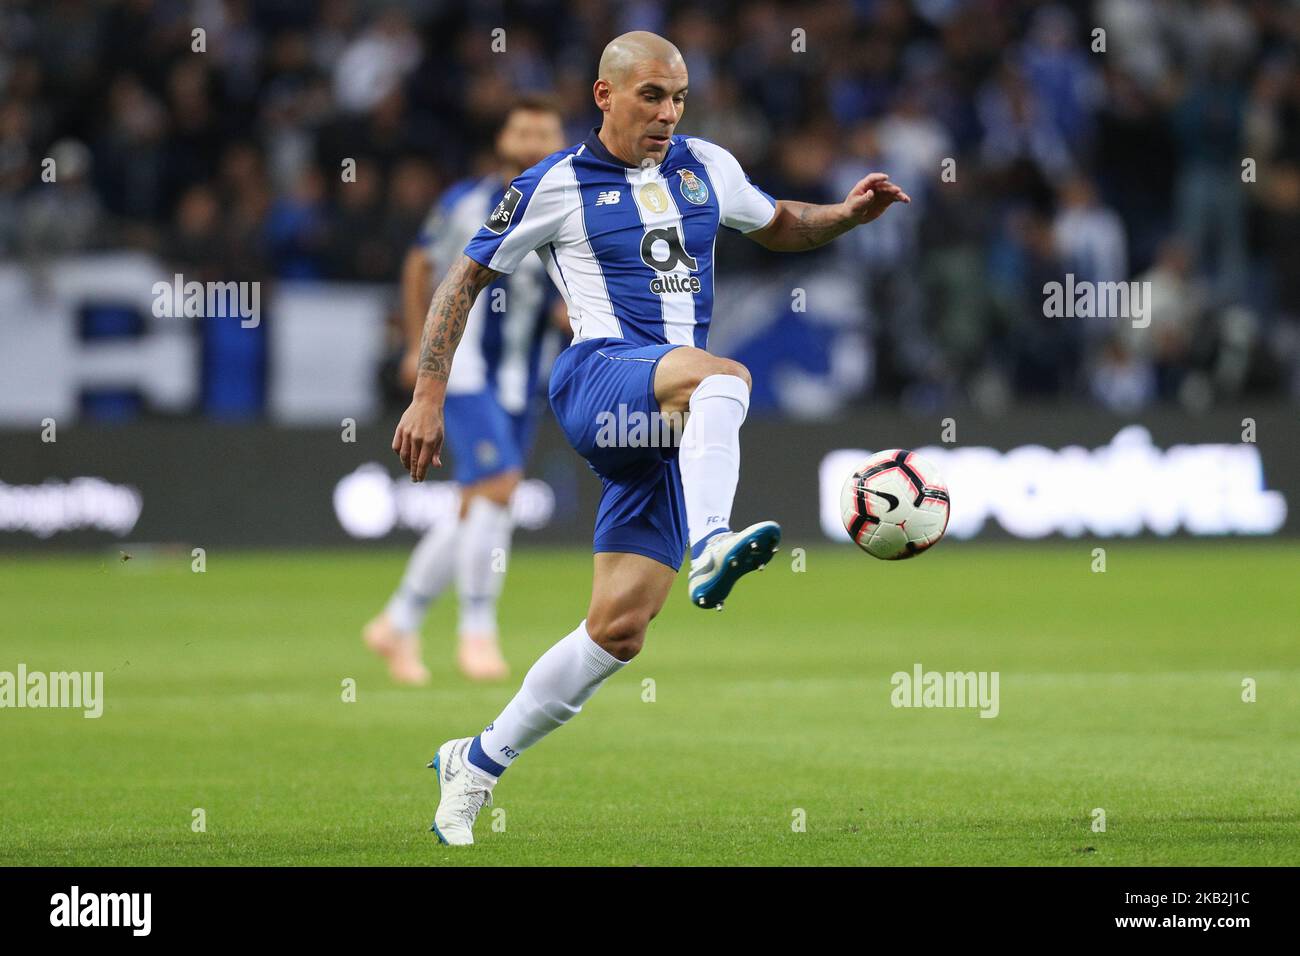 Porto's Uruguayan defender Maxi Pereira in action during the Premier League 2018/19 match between FC Porto and CD Feirense, at Dragao Stadium in Porto on October 28, 2018. (Photo by Paulo Oliveira / DPI / NurPhoto) Stock Photo